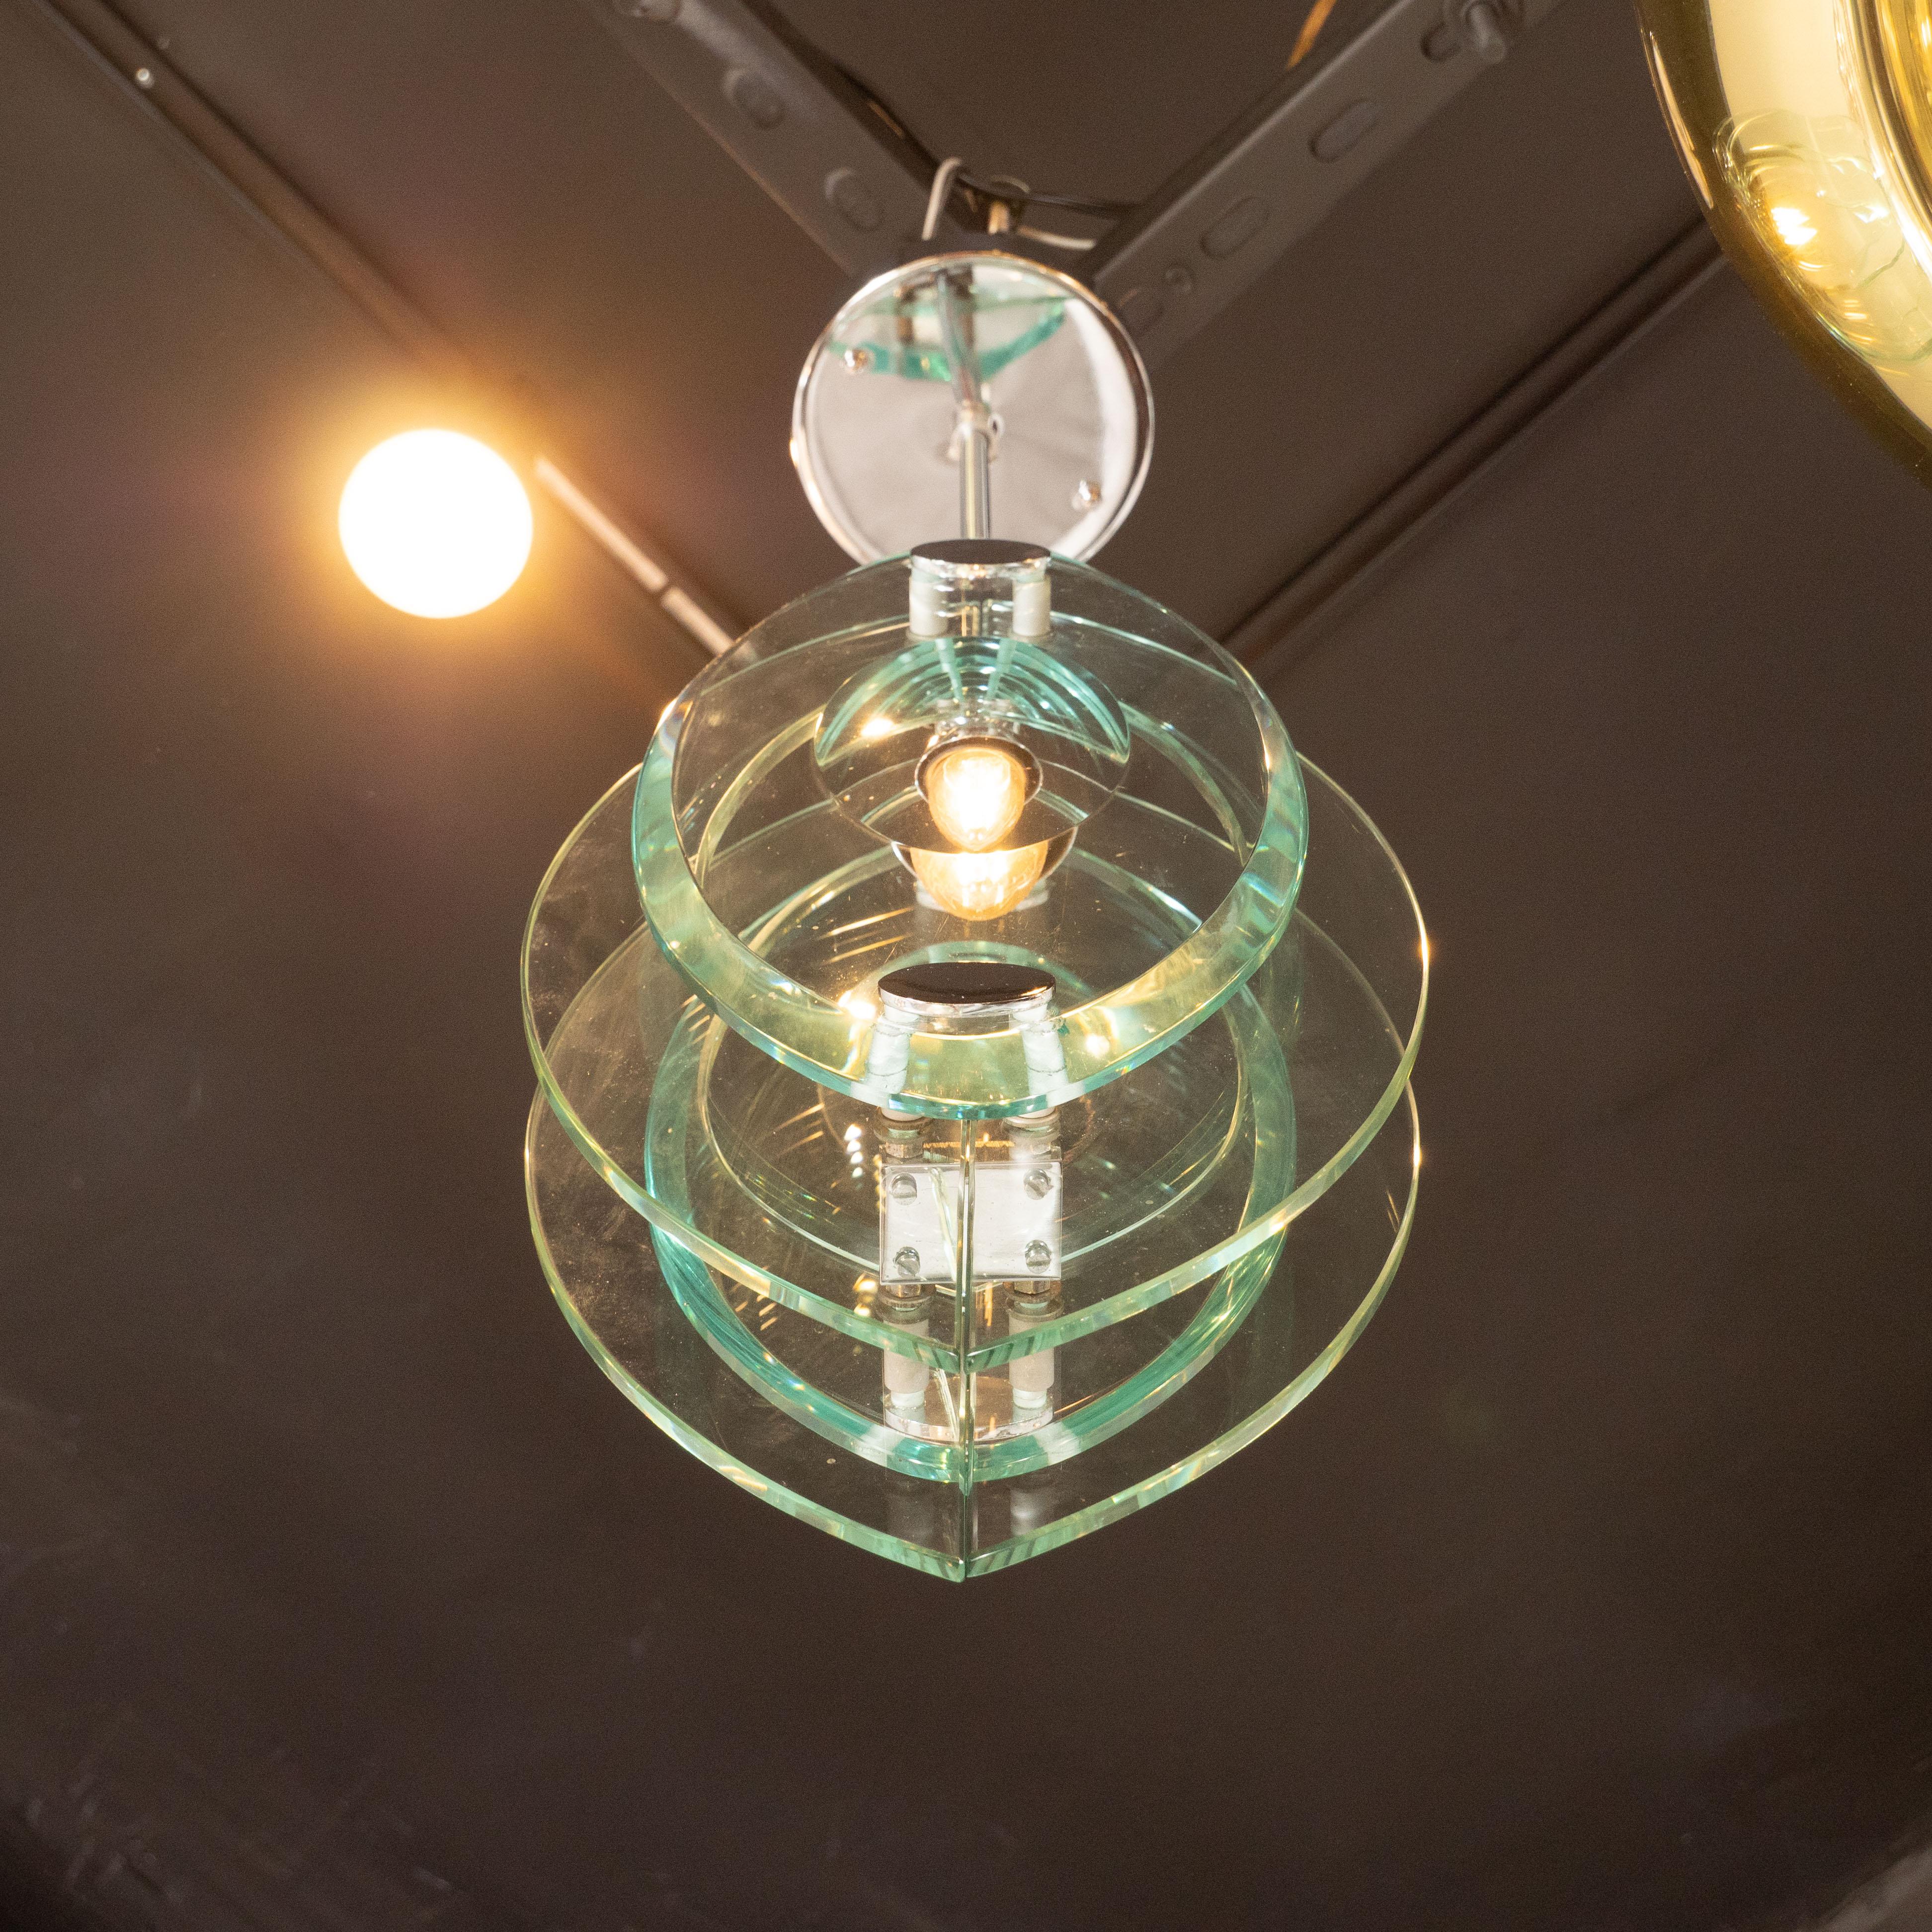 Mid-20th Century Mid-Century Modern Pendant with Chrome Fittings in the Manner of Fontana Arte